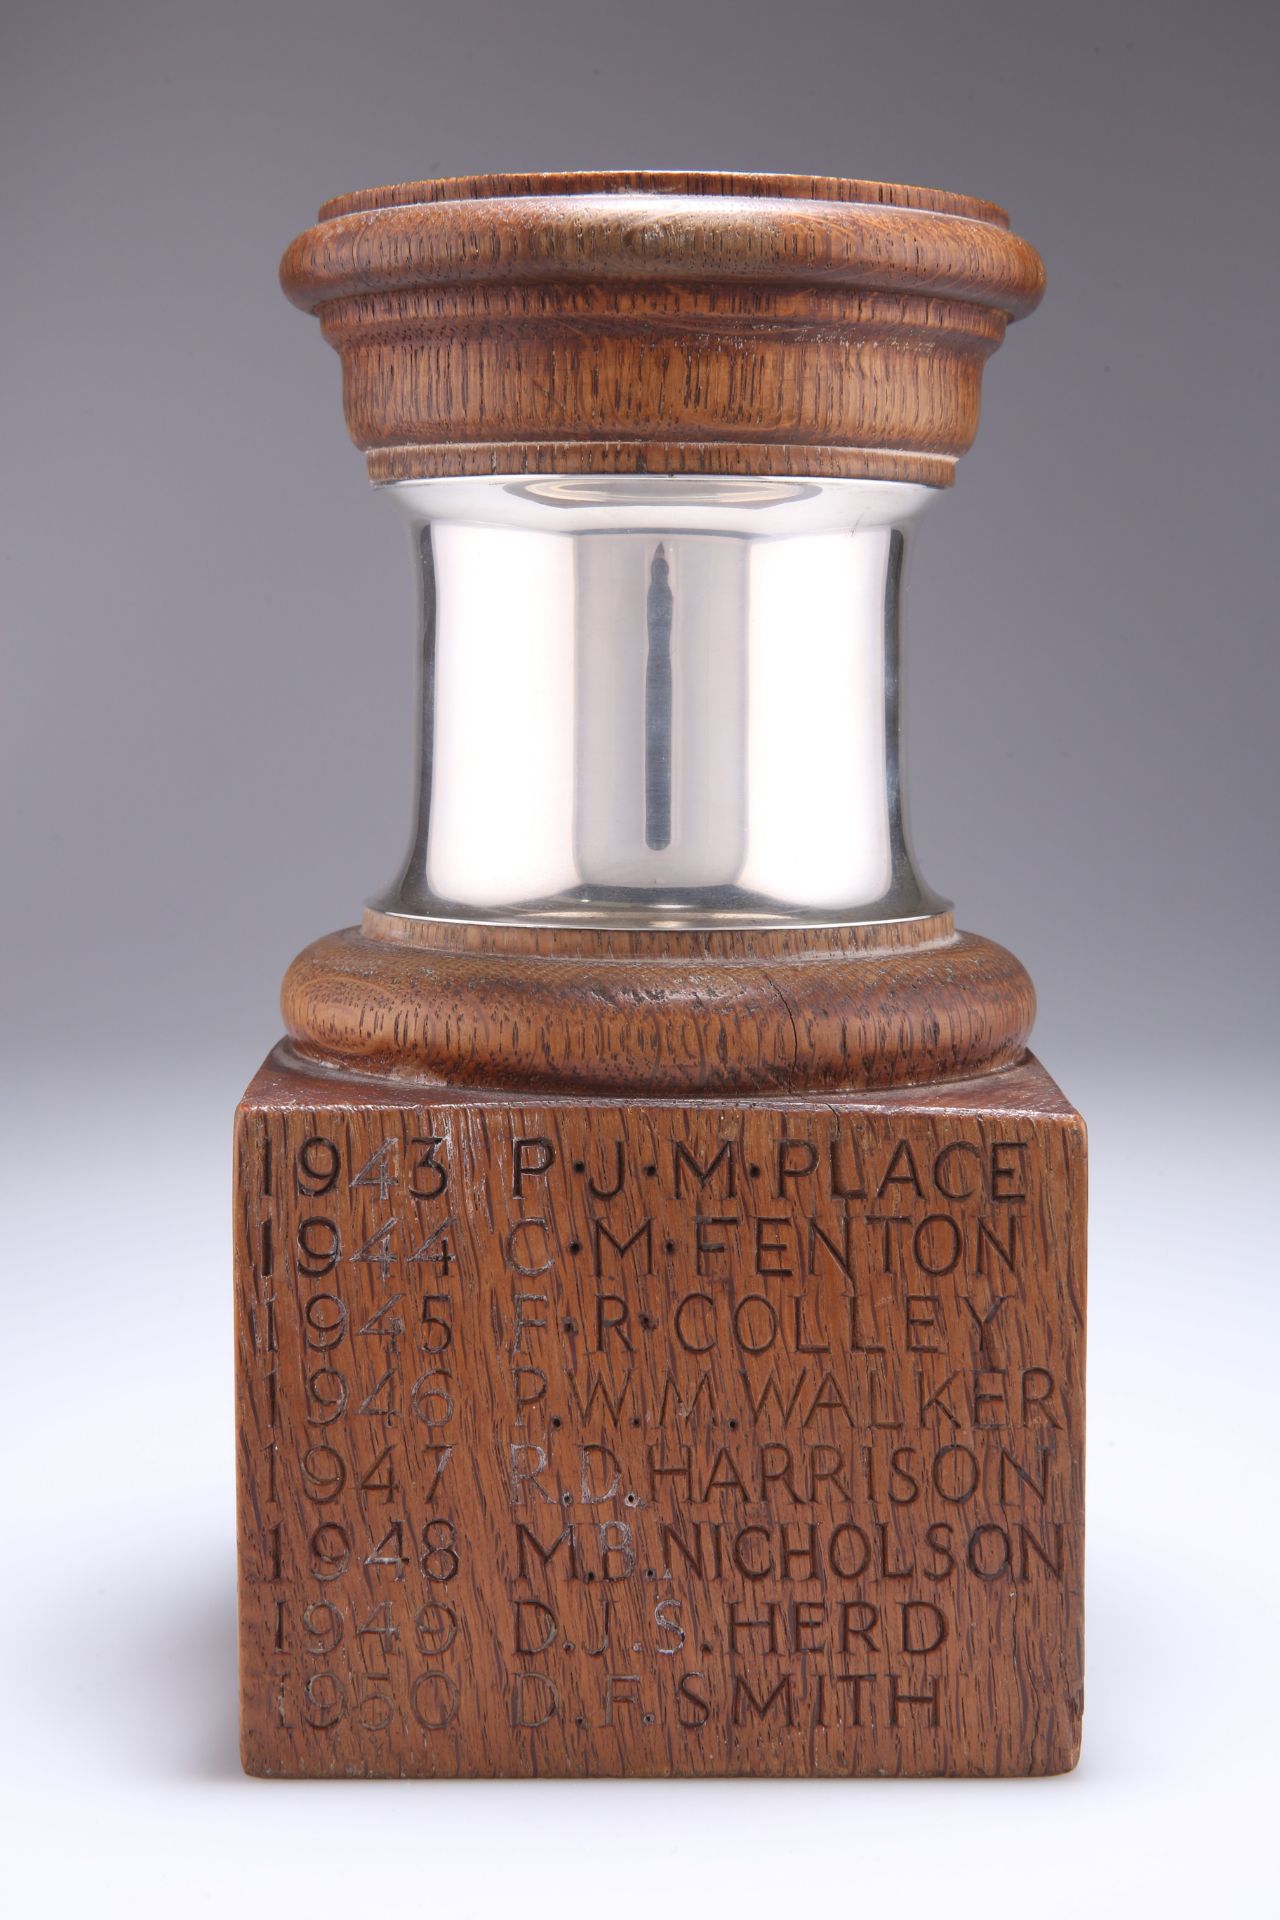 A BRITANNIA SILVER TROPHY CUP ON A MOUSEMAN OAK STAND - Image 5 of 8